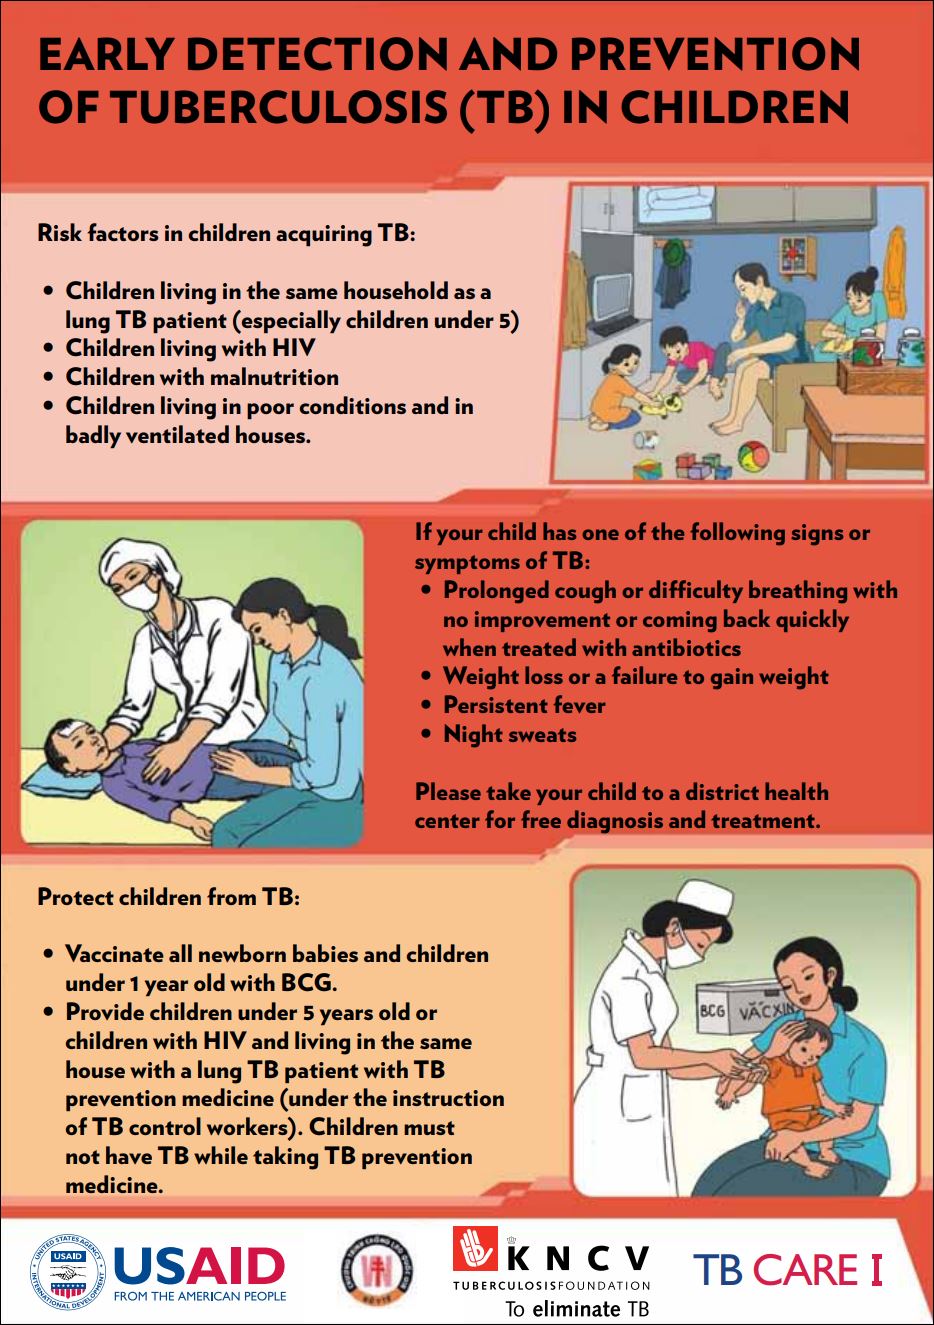 Vietnam Information, Education and Communication (IEC) Materials for Childhood TB